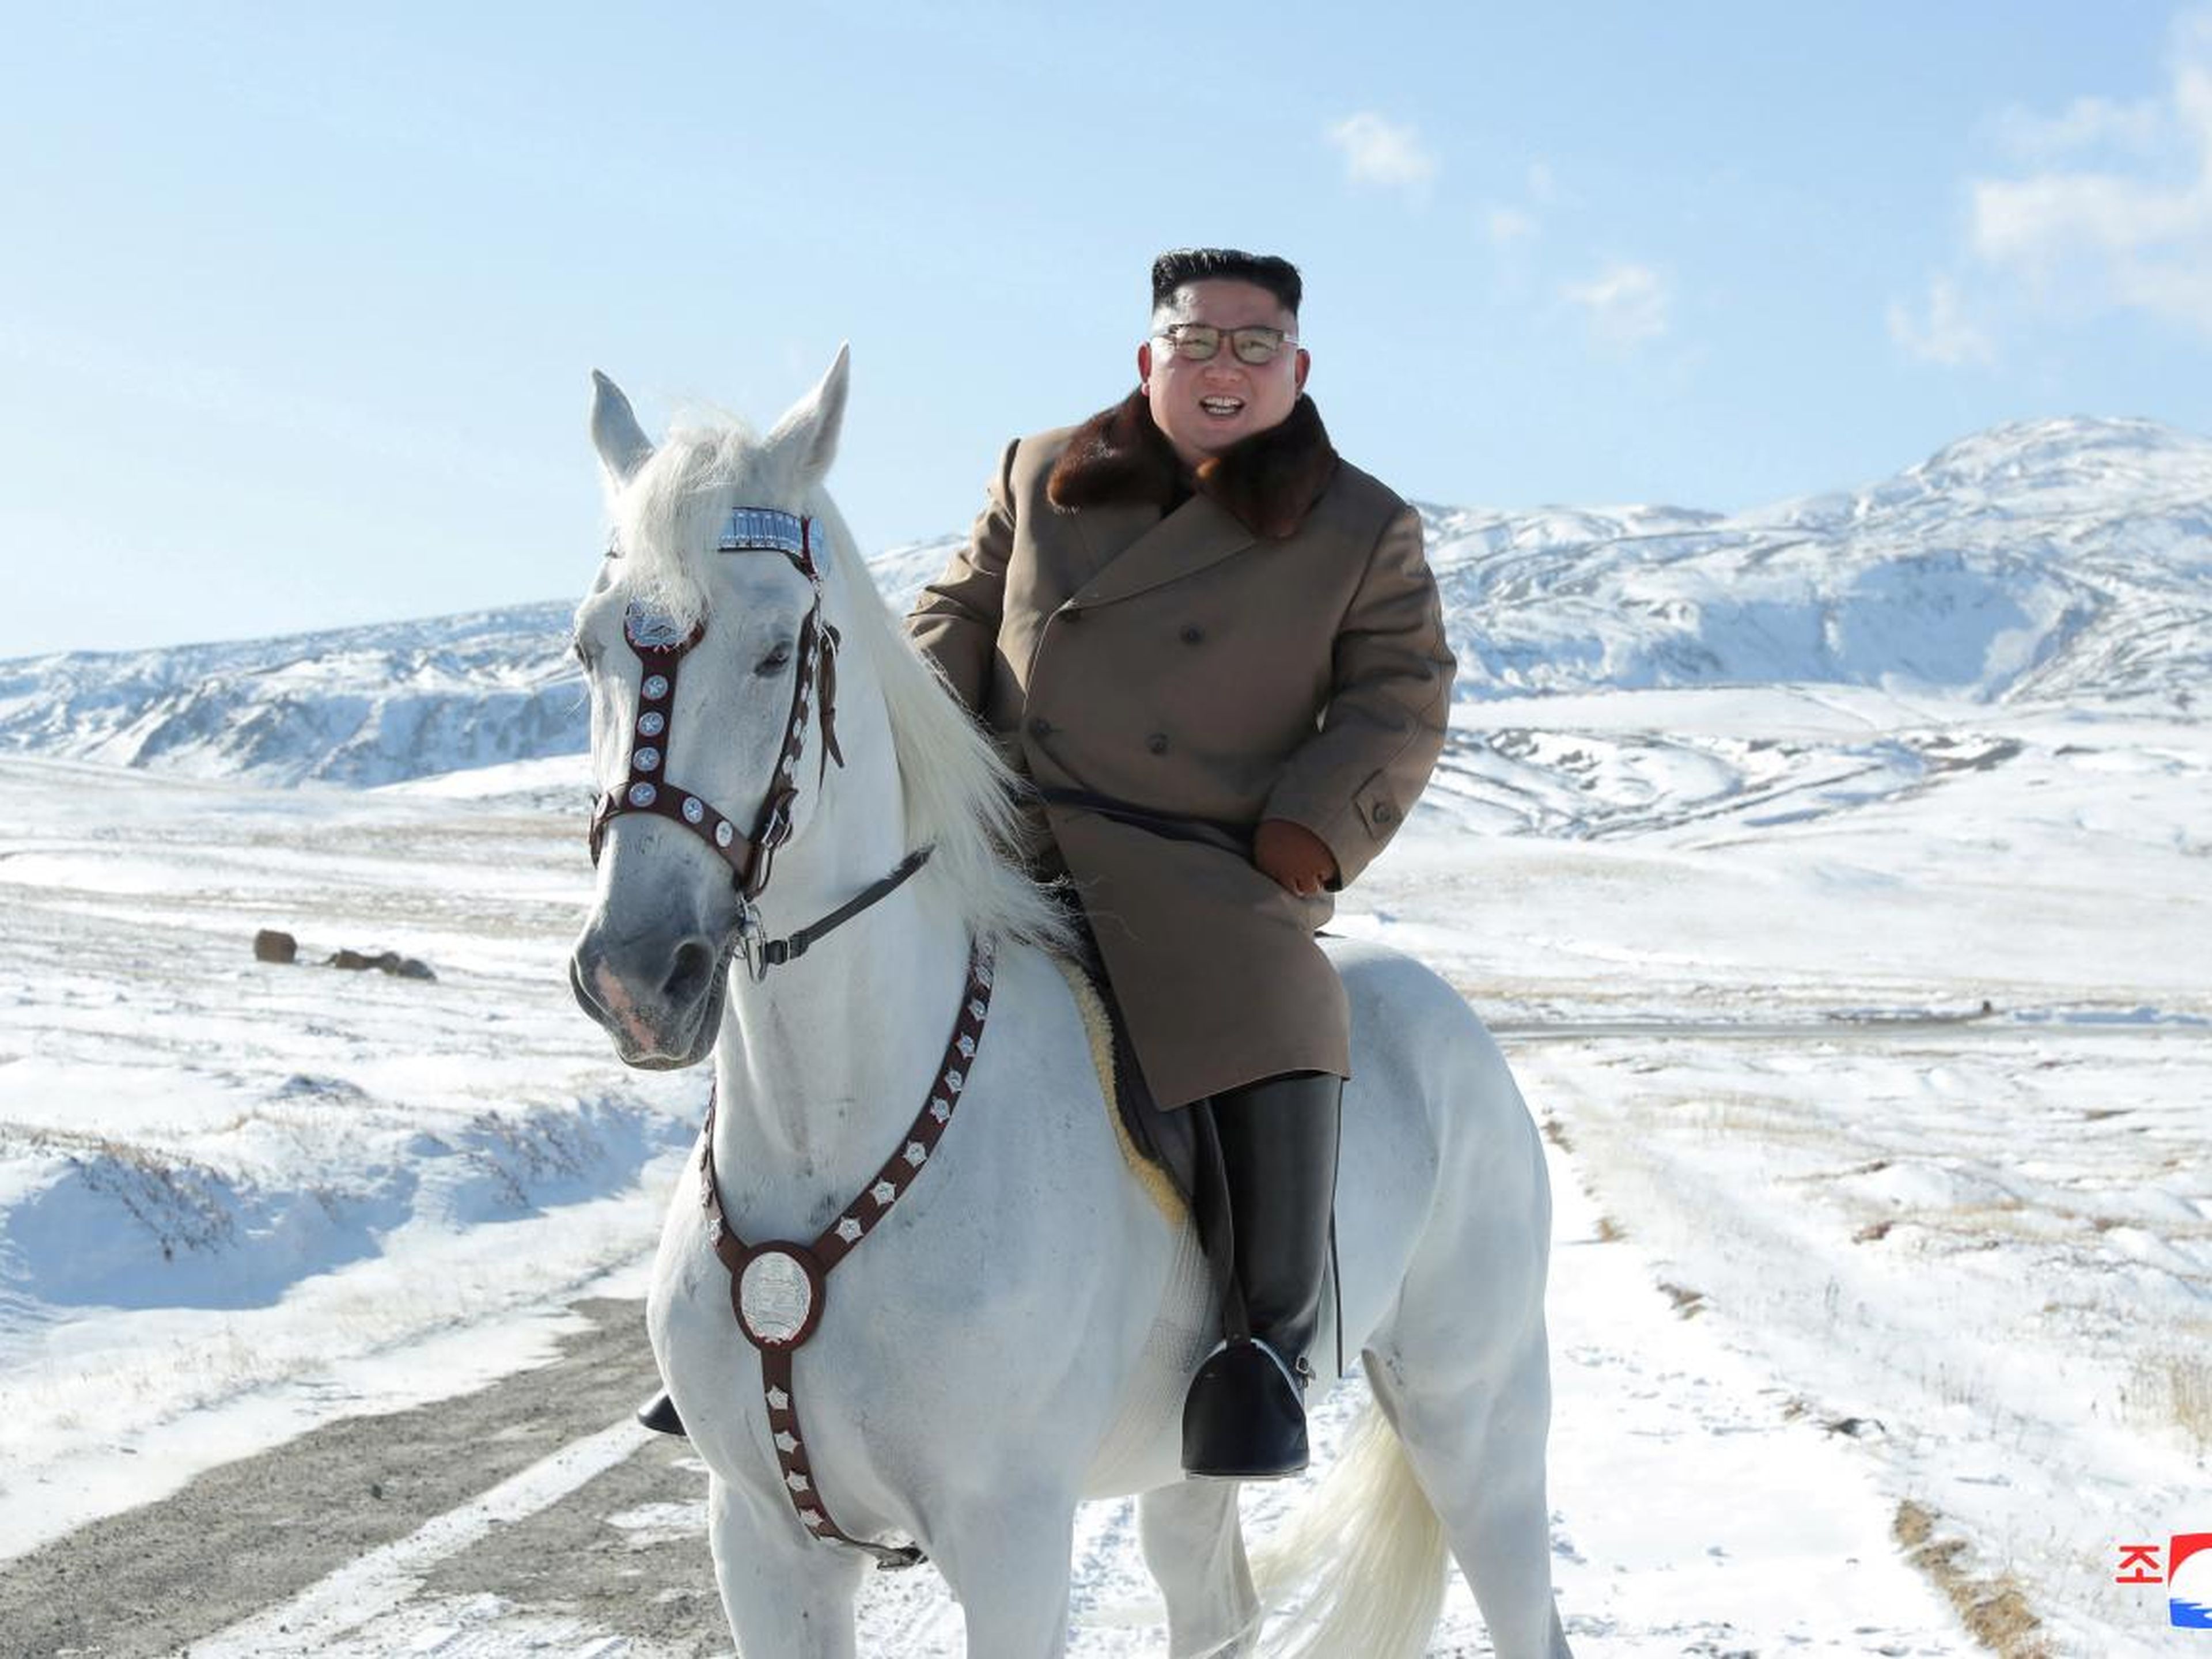 Mt. Paektu is a loaded location for the Kim family — and North Koreans.